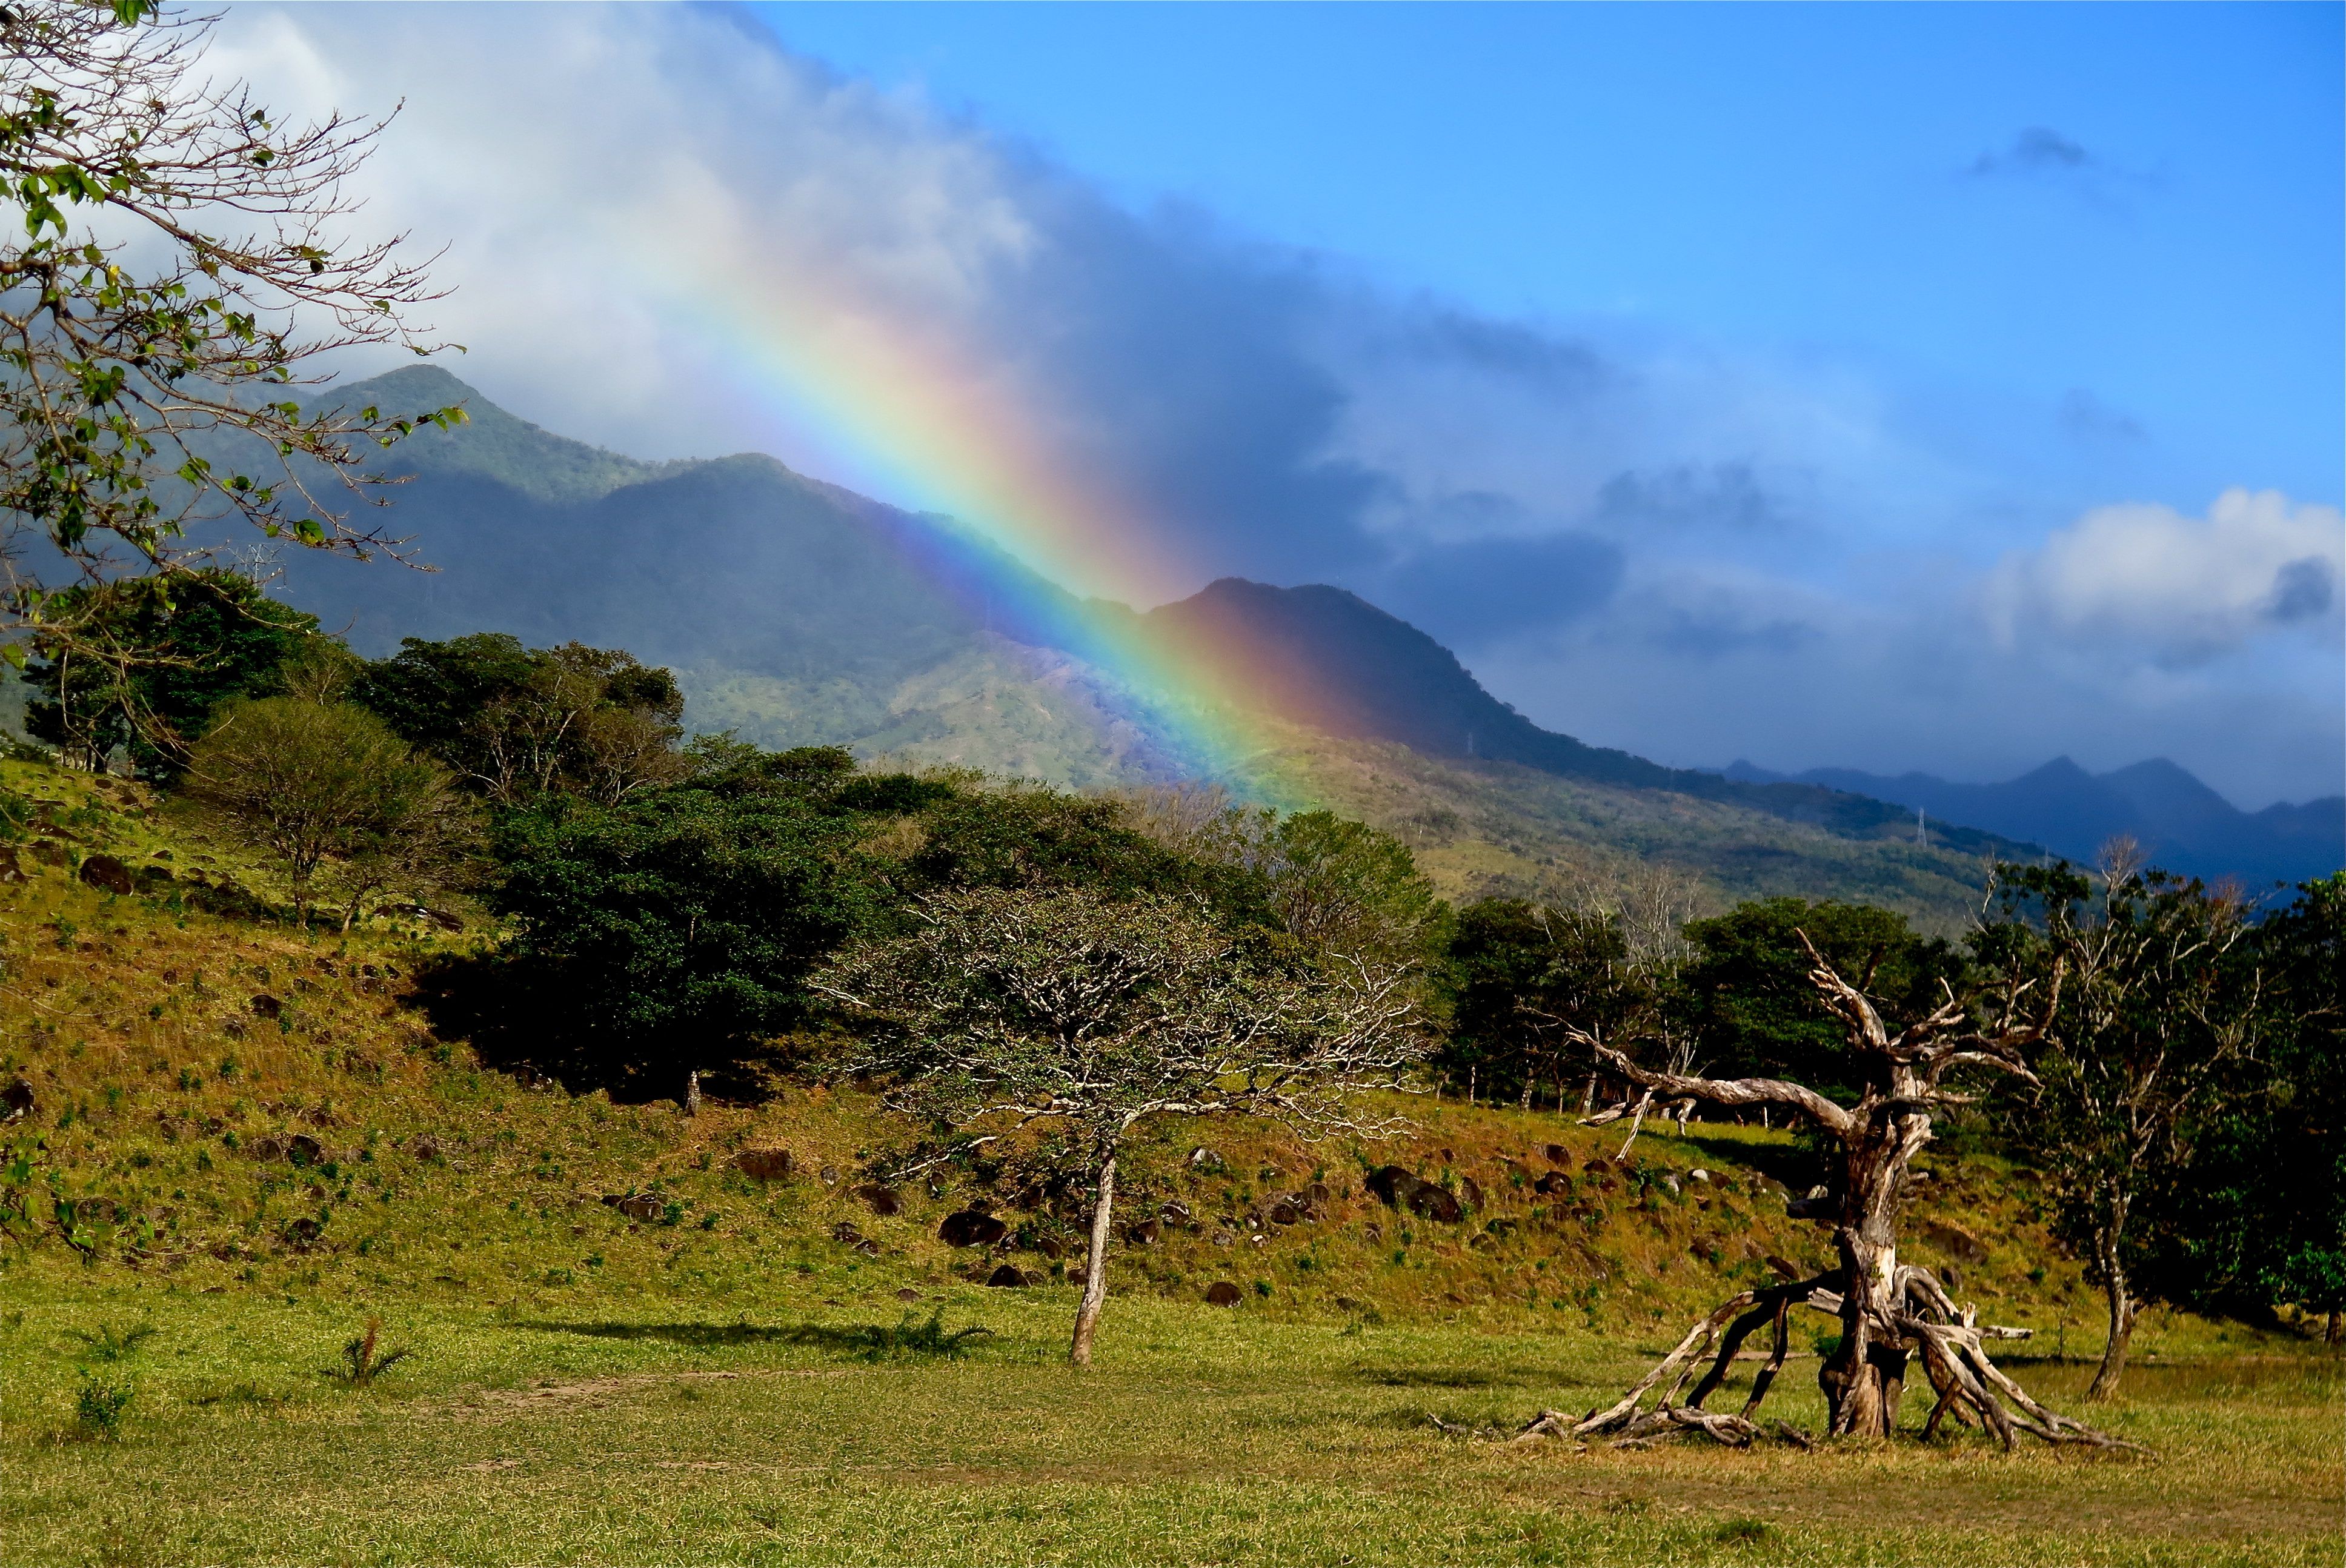 Bright sunlight and mountain mists produce a feast of rainbows in Boquete, Panama. Photo/Keith Schneider